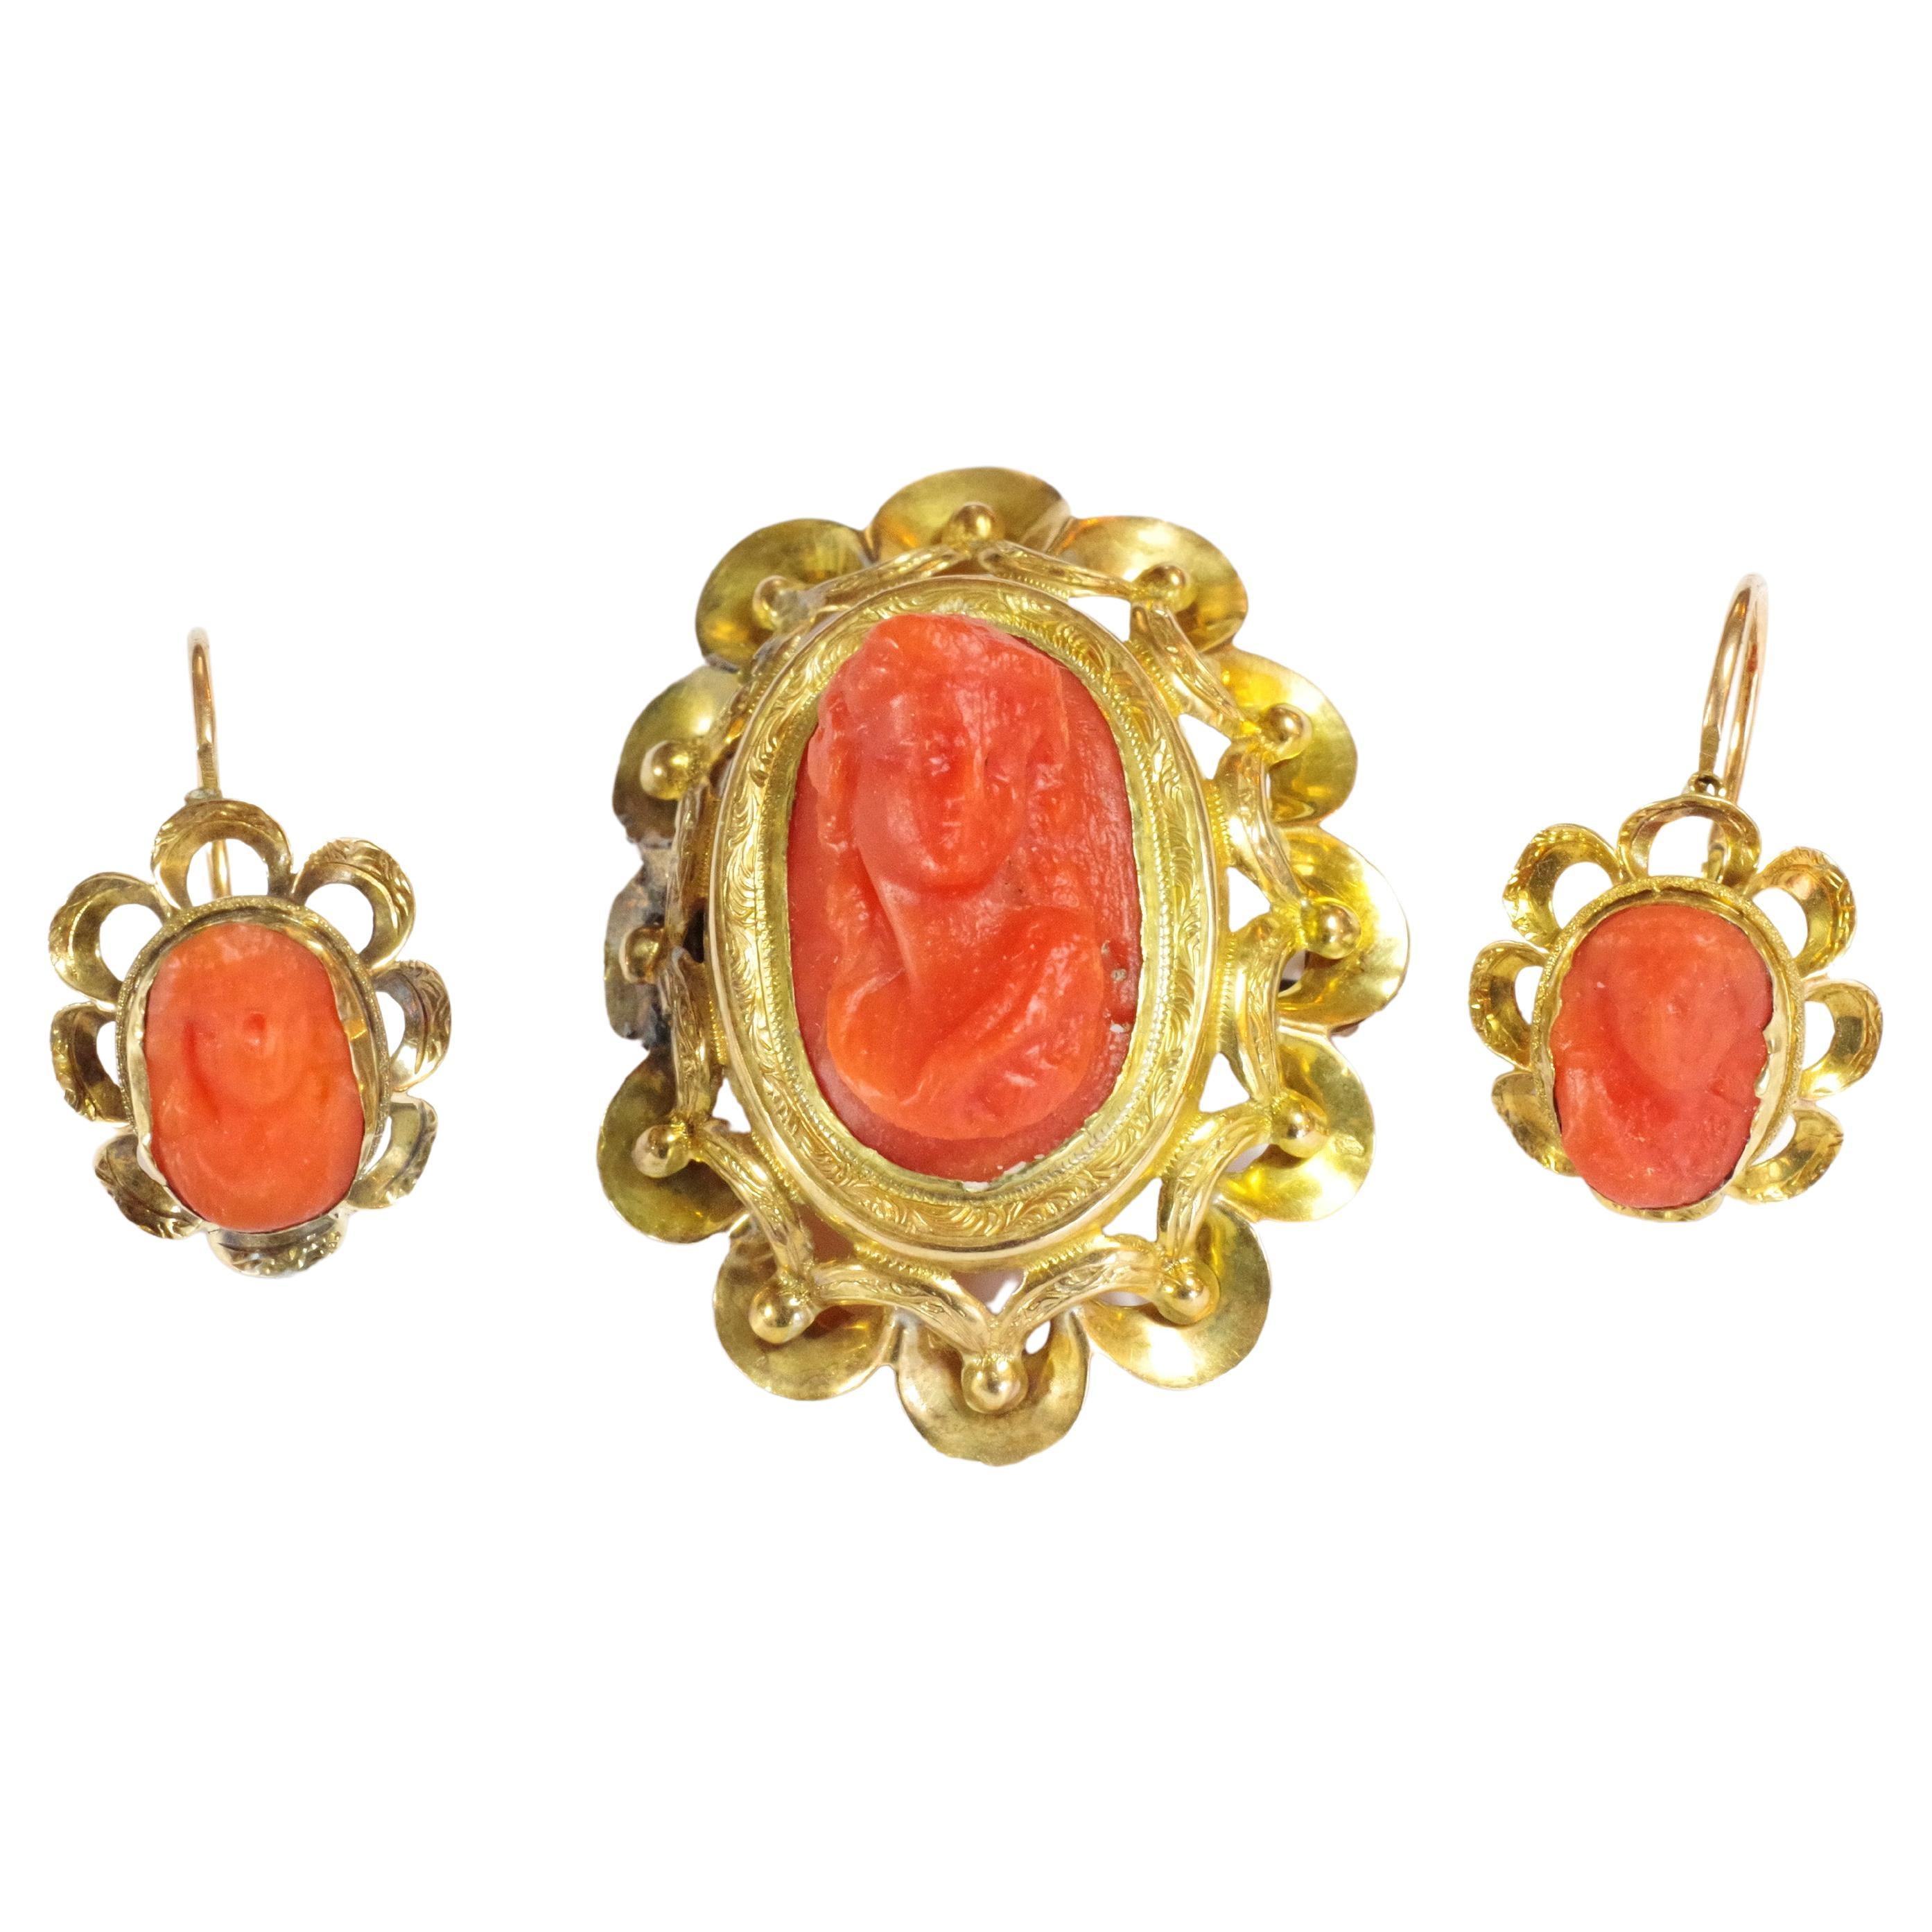 Coral cameos brooch and earrings in 18k gold, cameo brooch earrings set For Sale